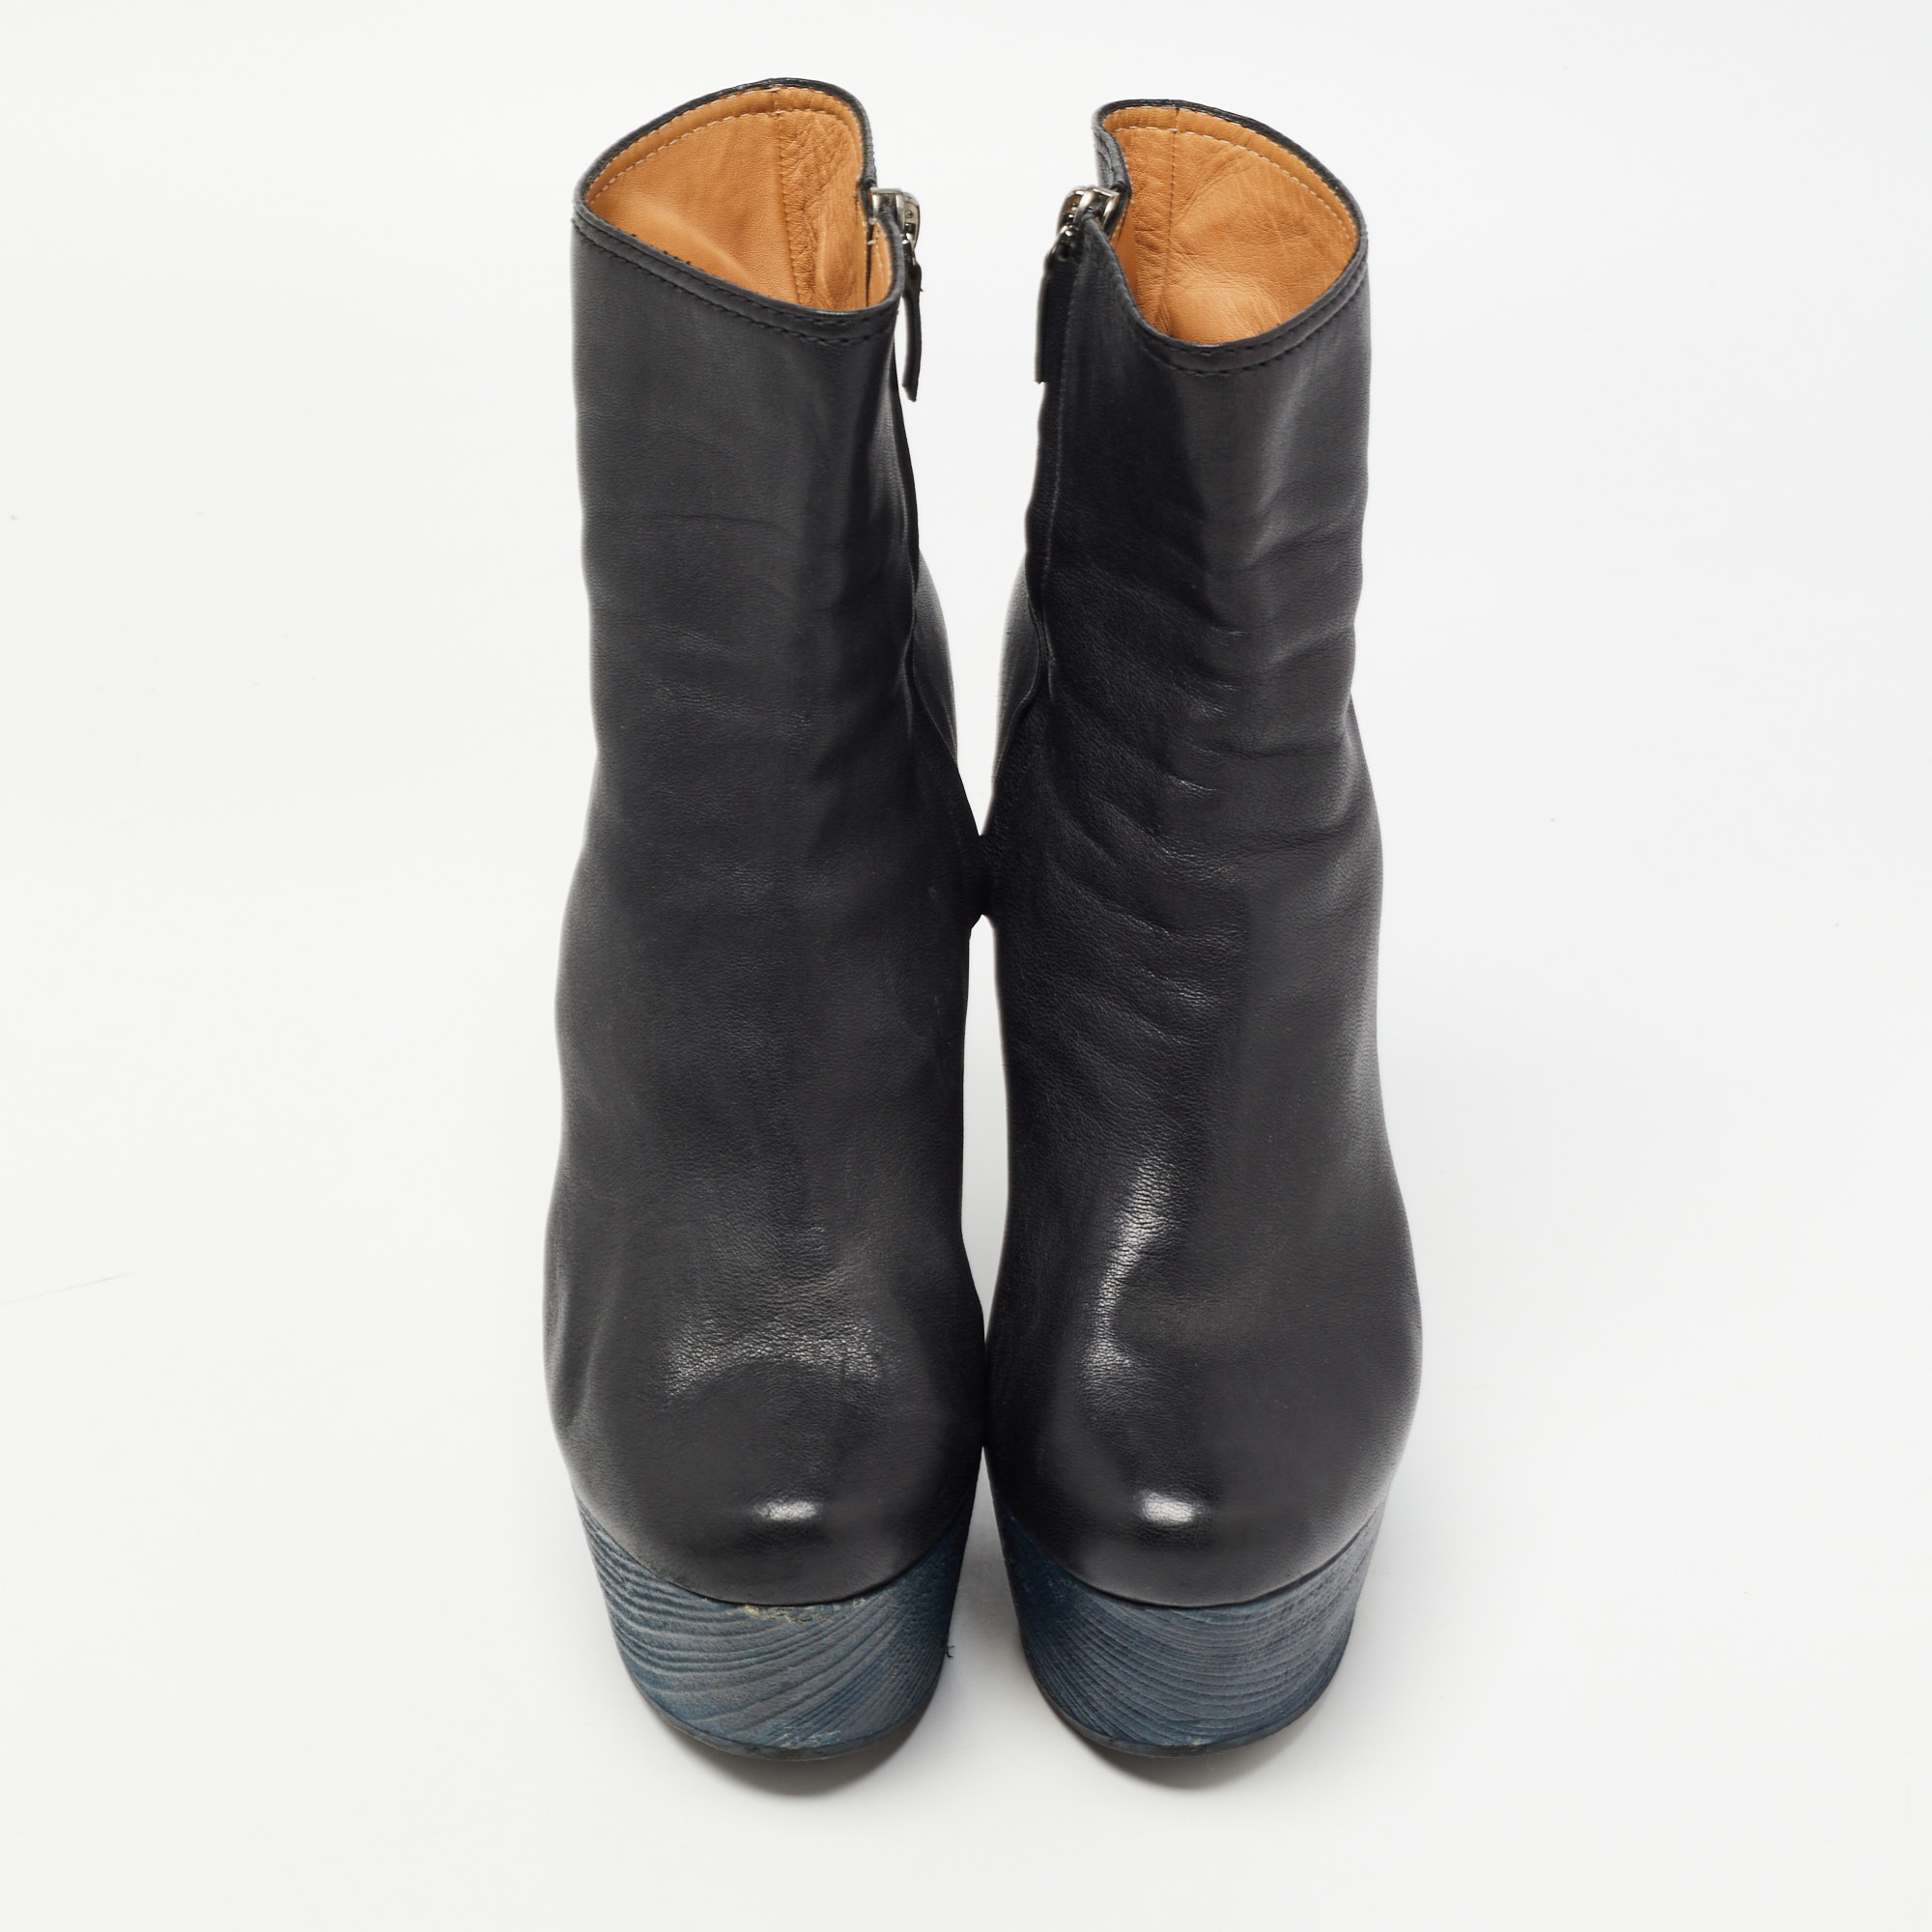 Lanvin Black Leather Wedge Boots Size 40